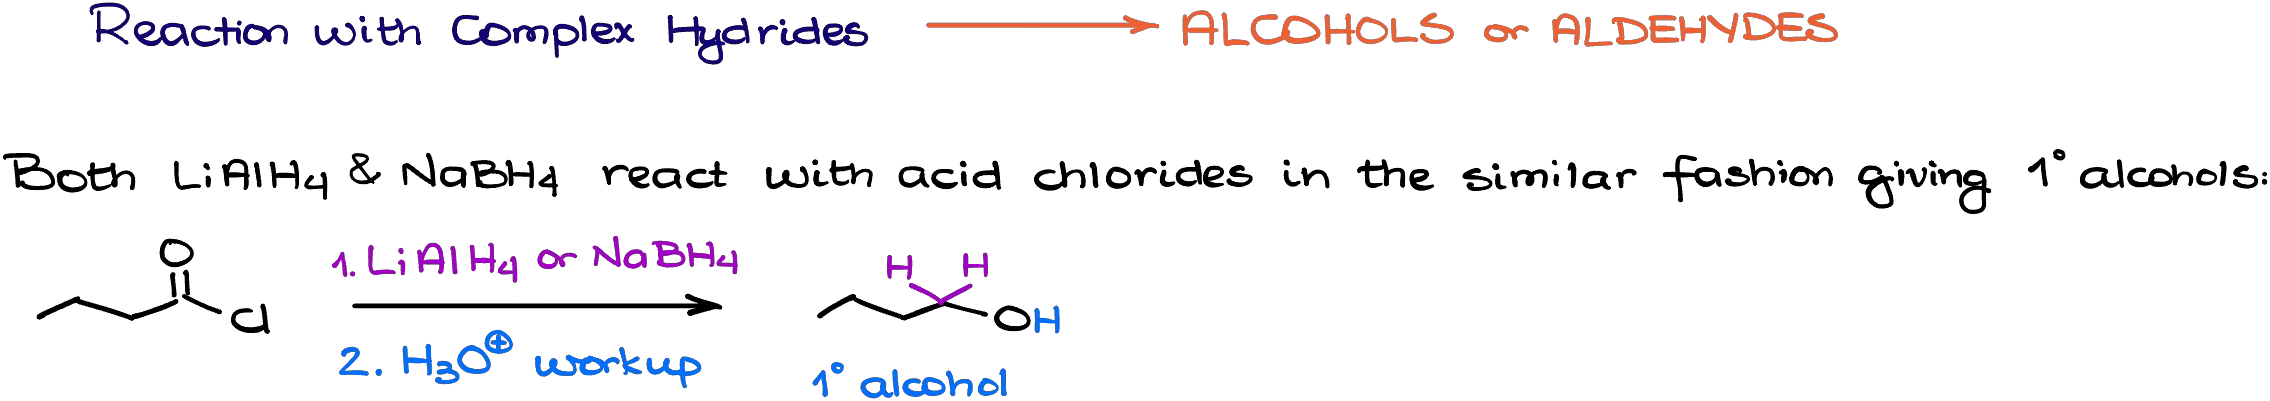 reduction of acid chlorides with complex hydrides